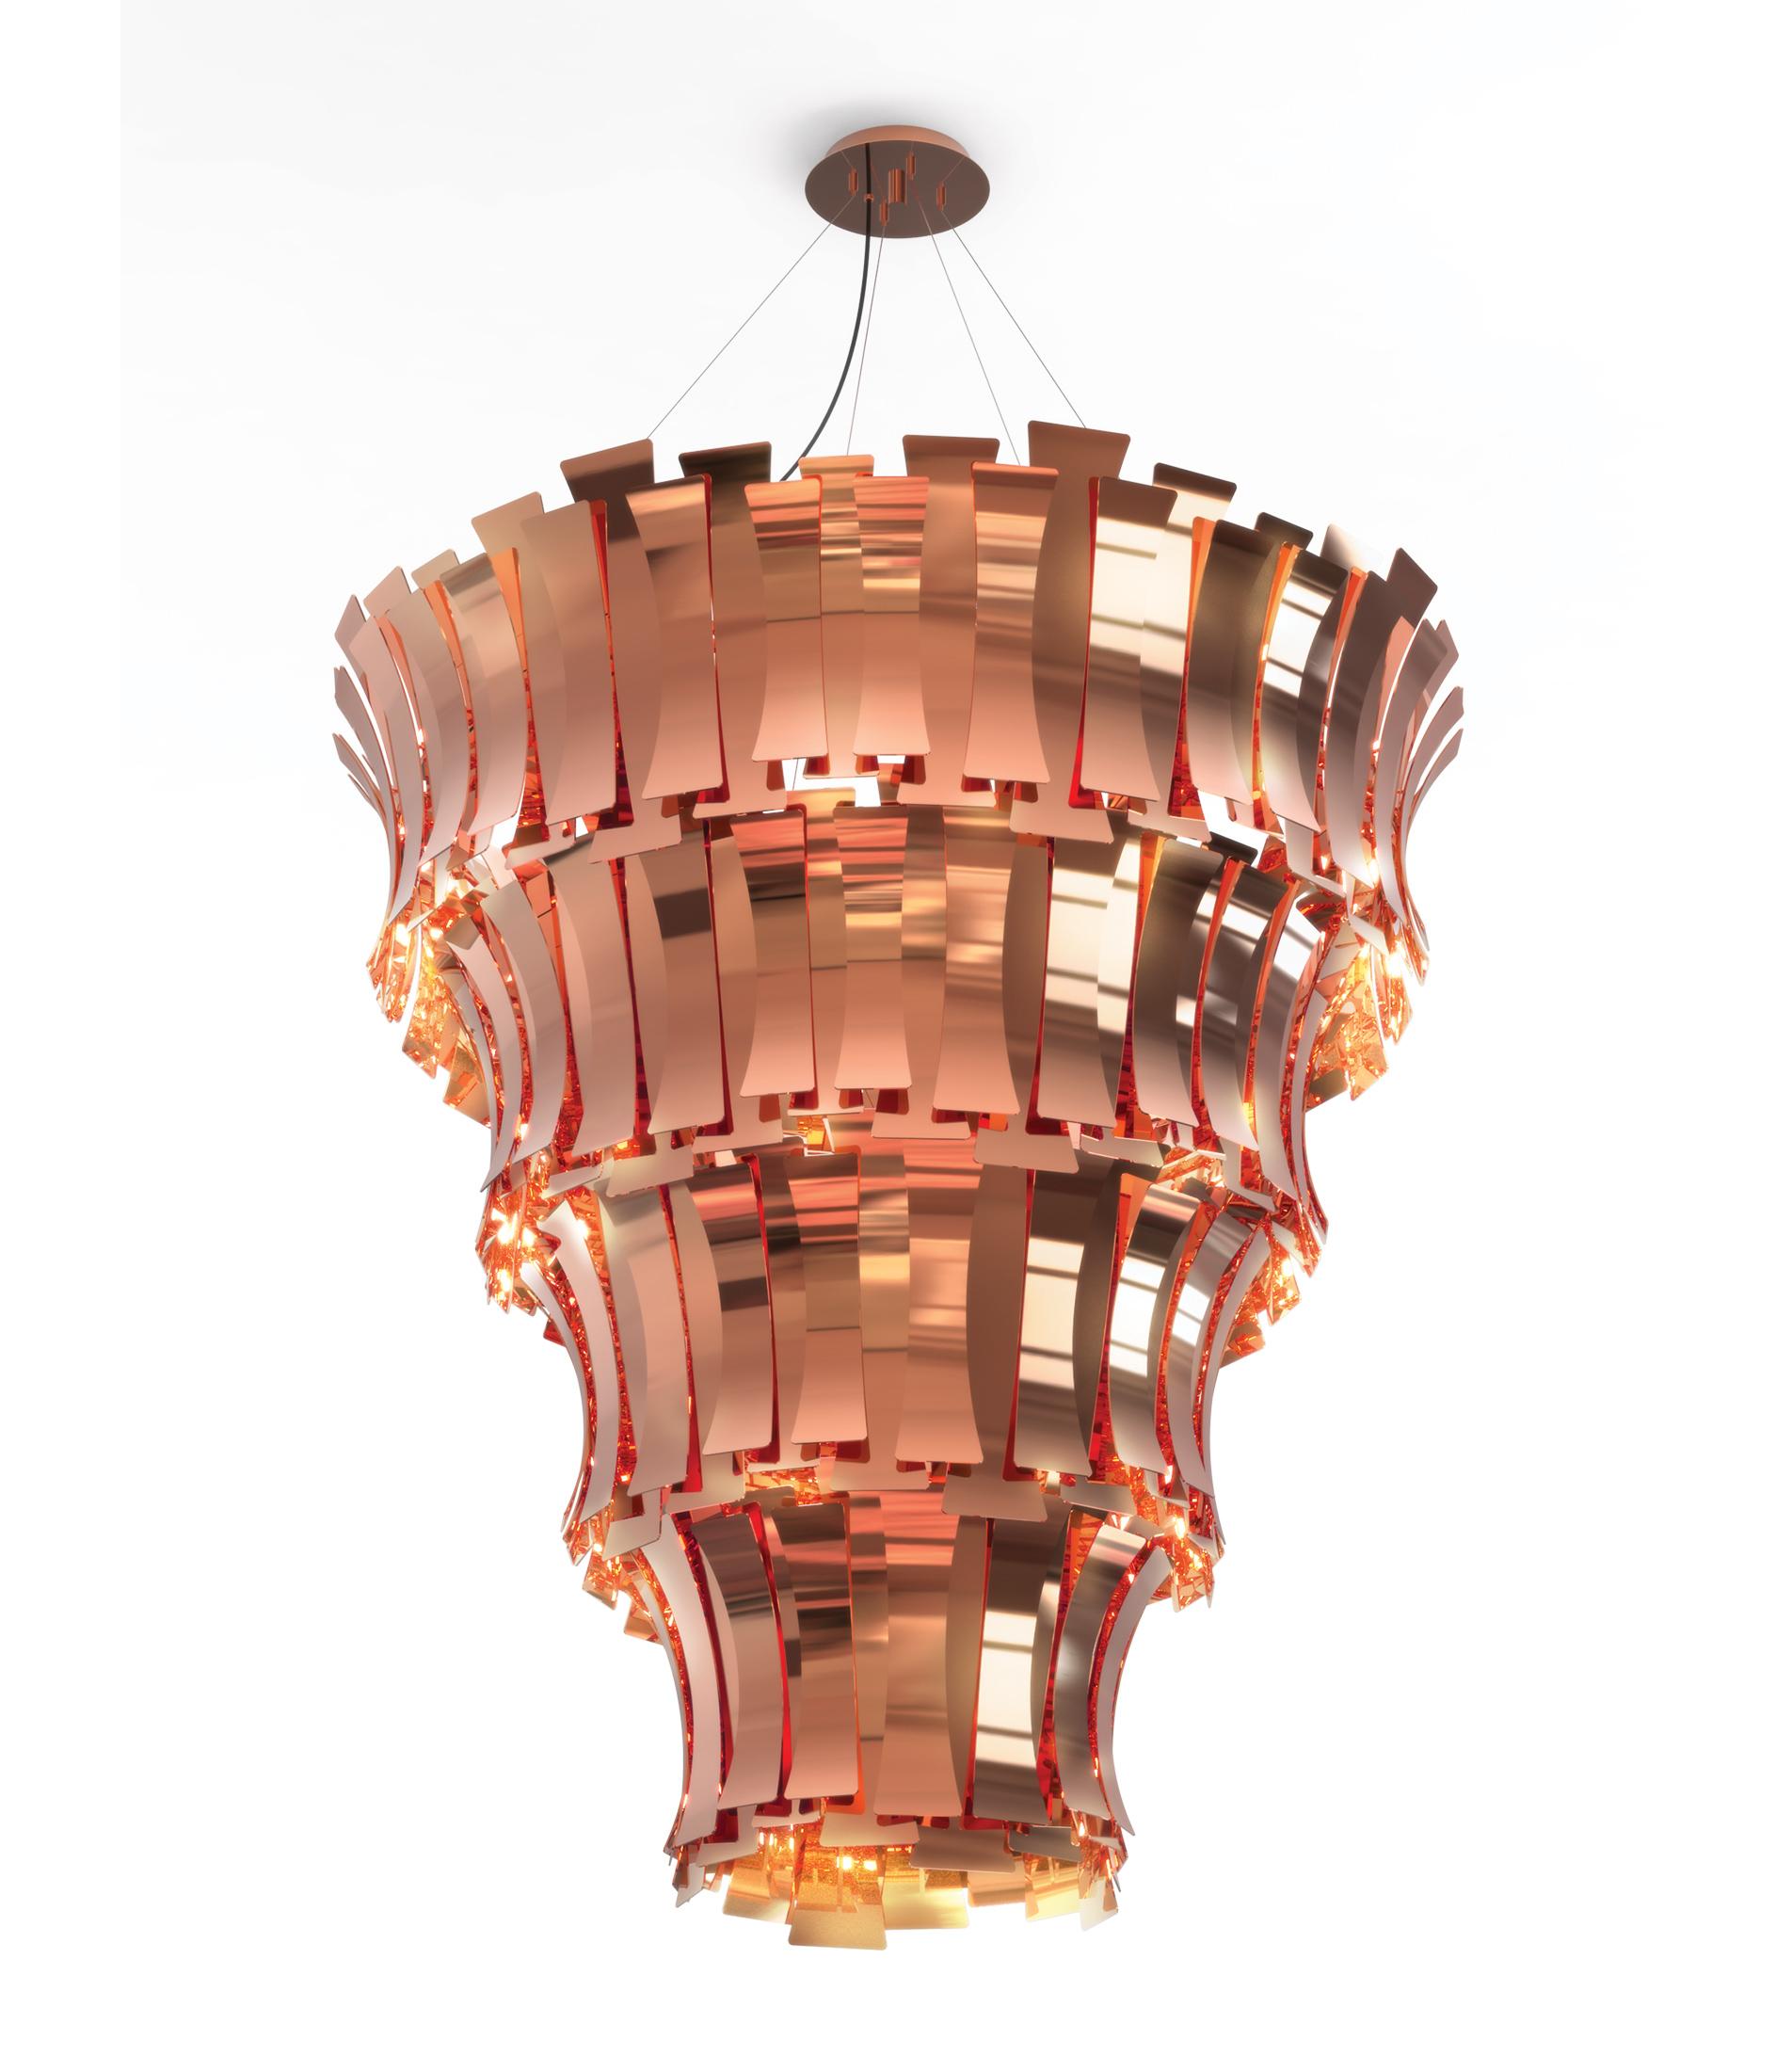 Etta is a large chandelier inspired by one of the best jazz singers of all times. Being the sophisticated lighting design it is, it boasts a nostalgic and feminine vibe, making it the right choice for every luxurious interior design. Each one of its